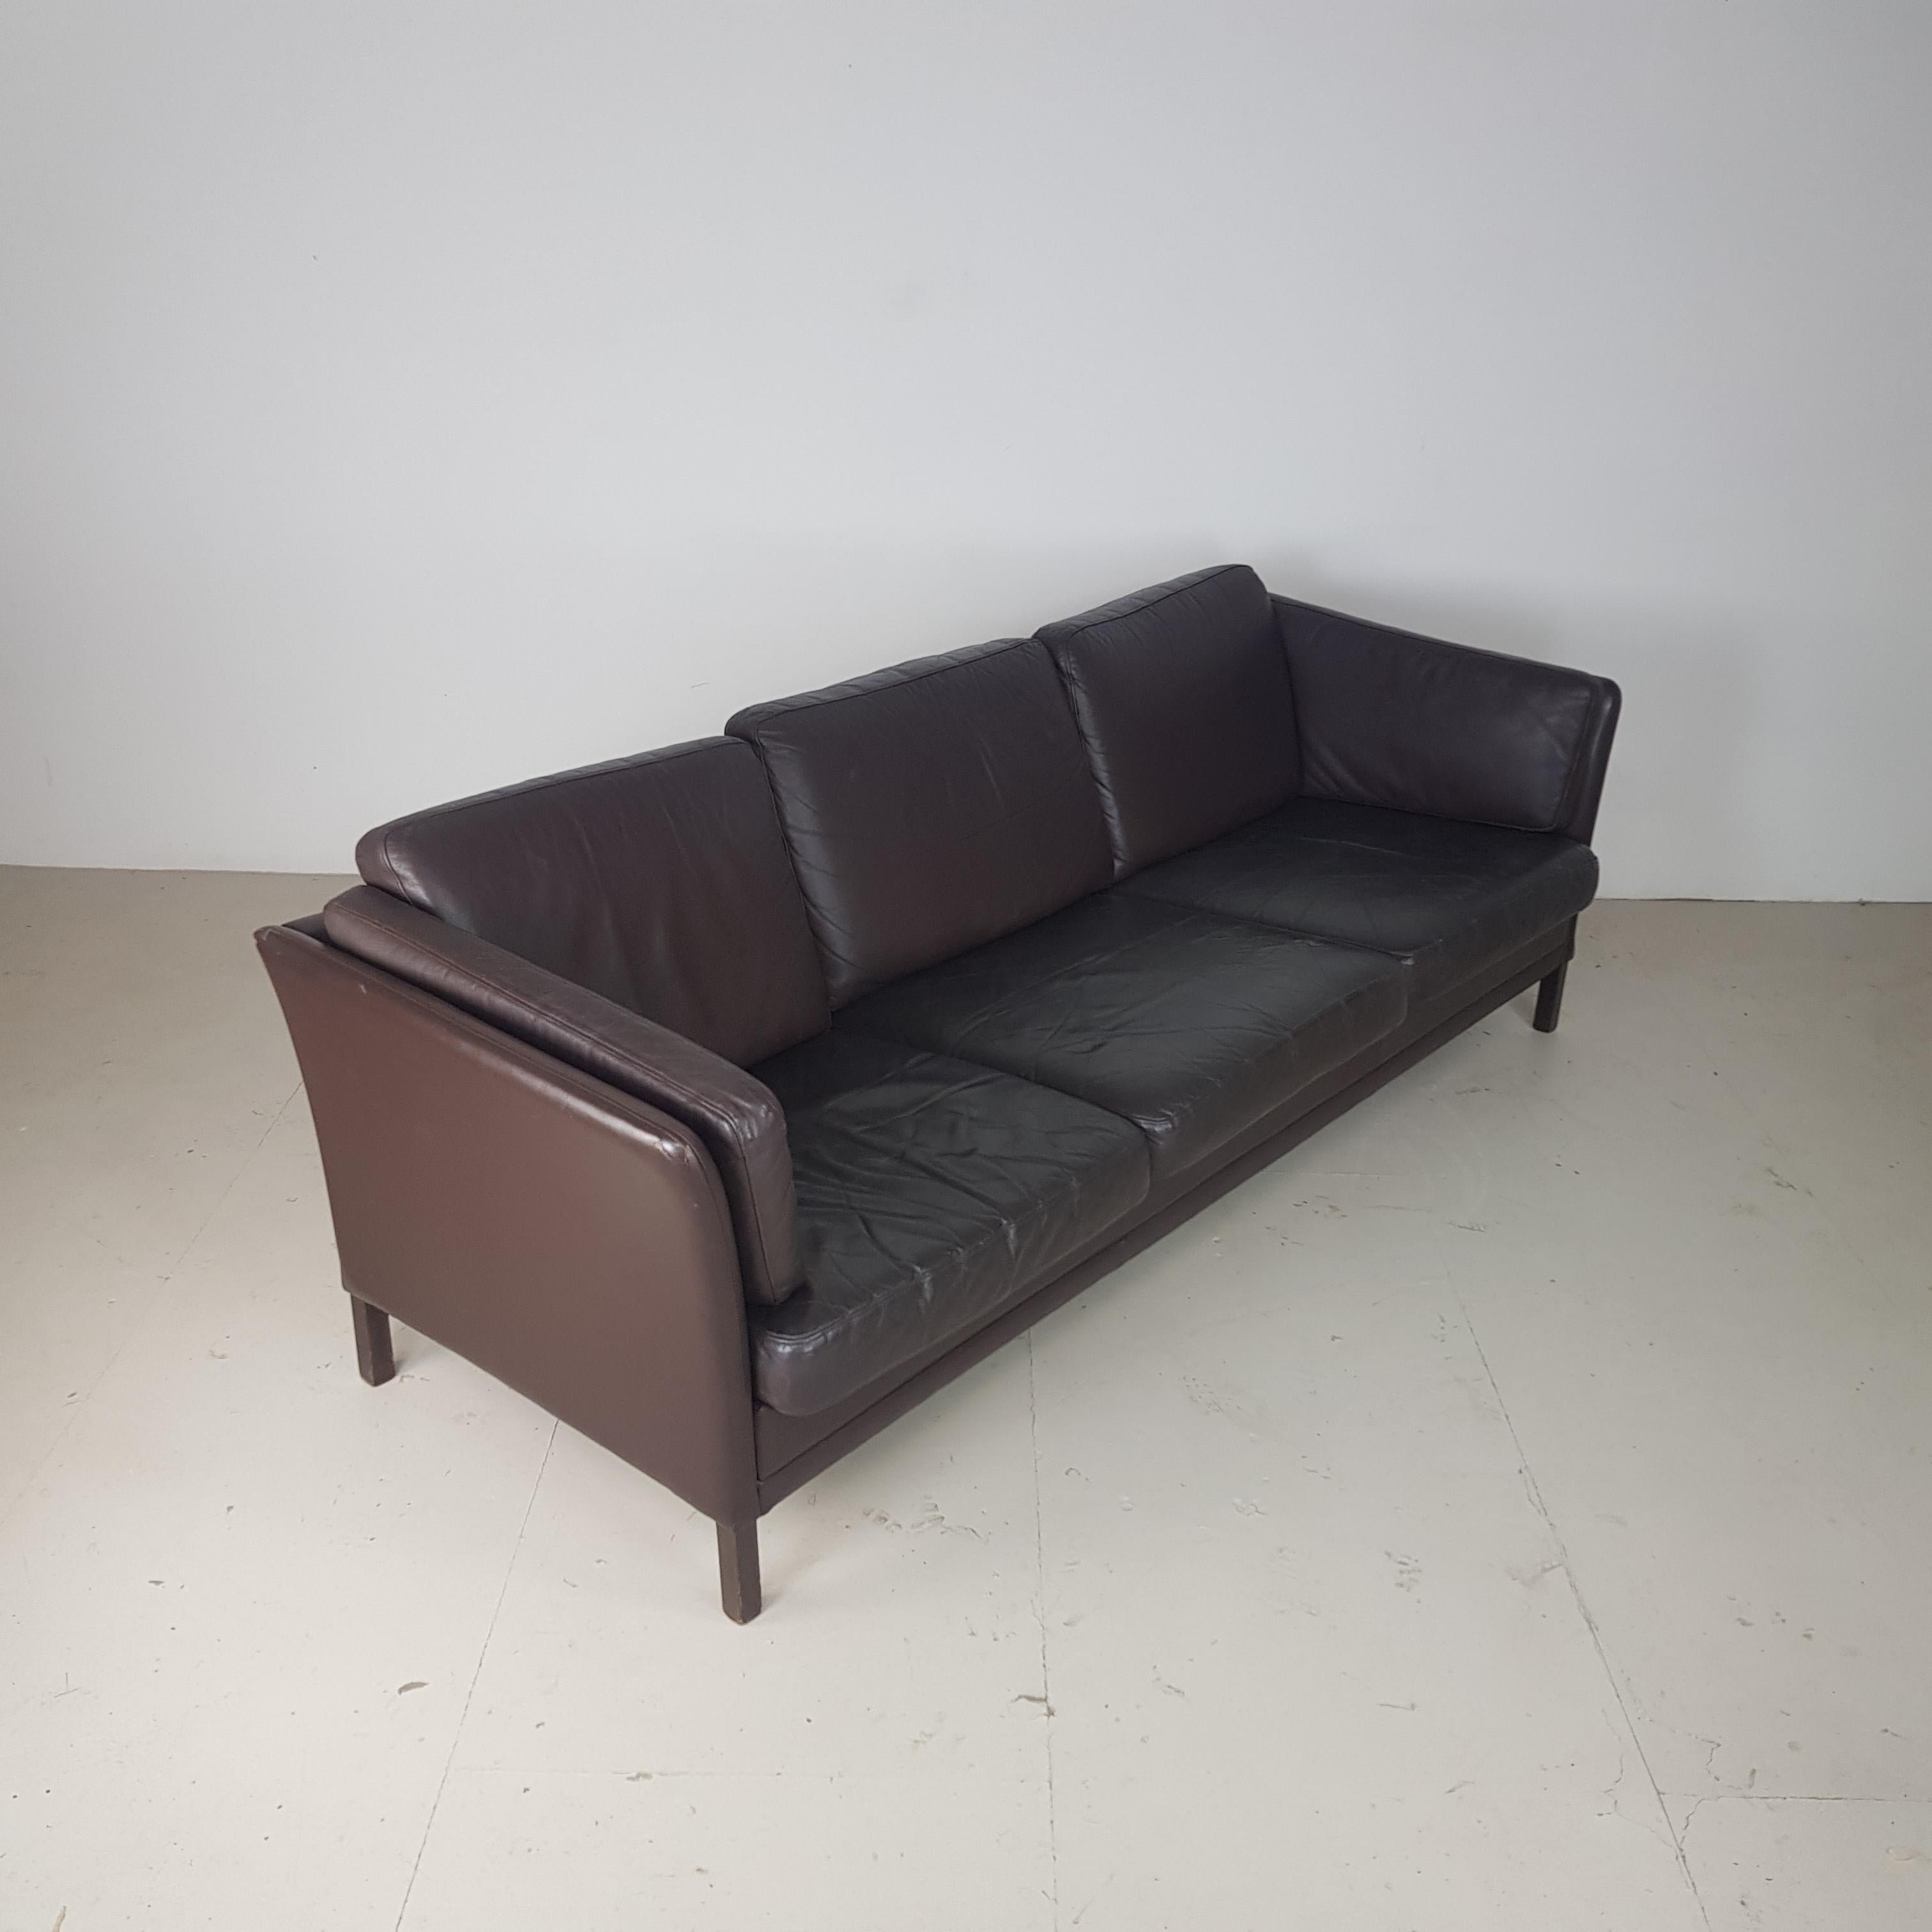 Gorgeous dark brown leather Mogensen style 1970s 3-seat Danish sofa.

Detachable seat cushions.  Wooden legs.

Approx dimensions:

Width 215cm

Height 73cm

Depth 80cm

Seat height 40cm.

In good vintage condition; some age-related